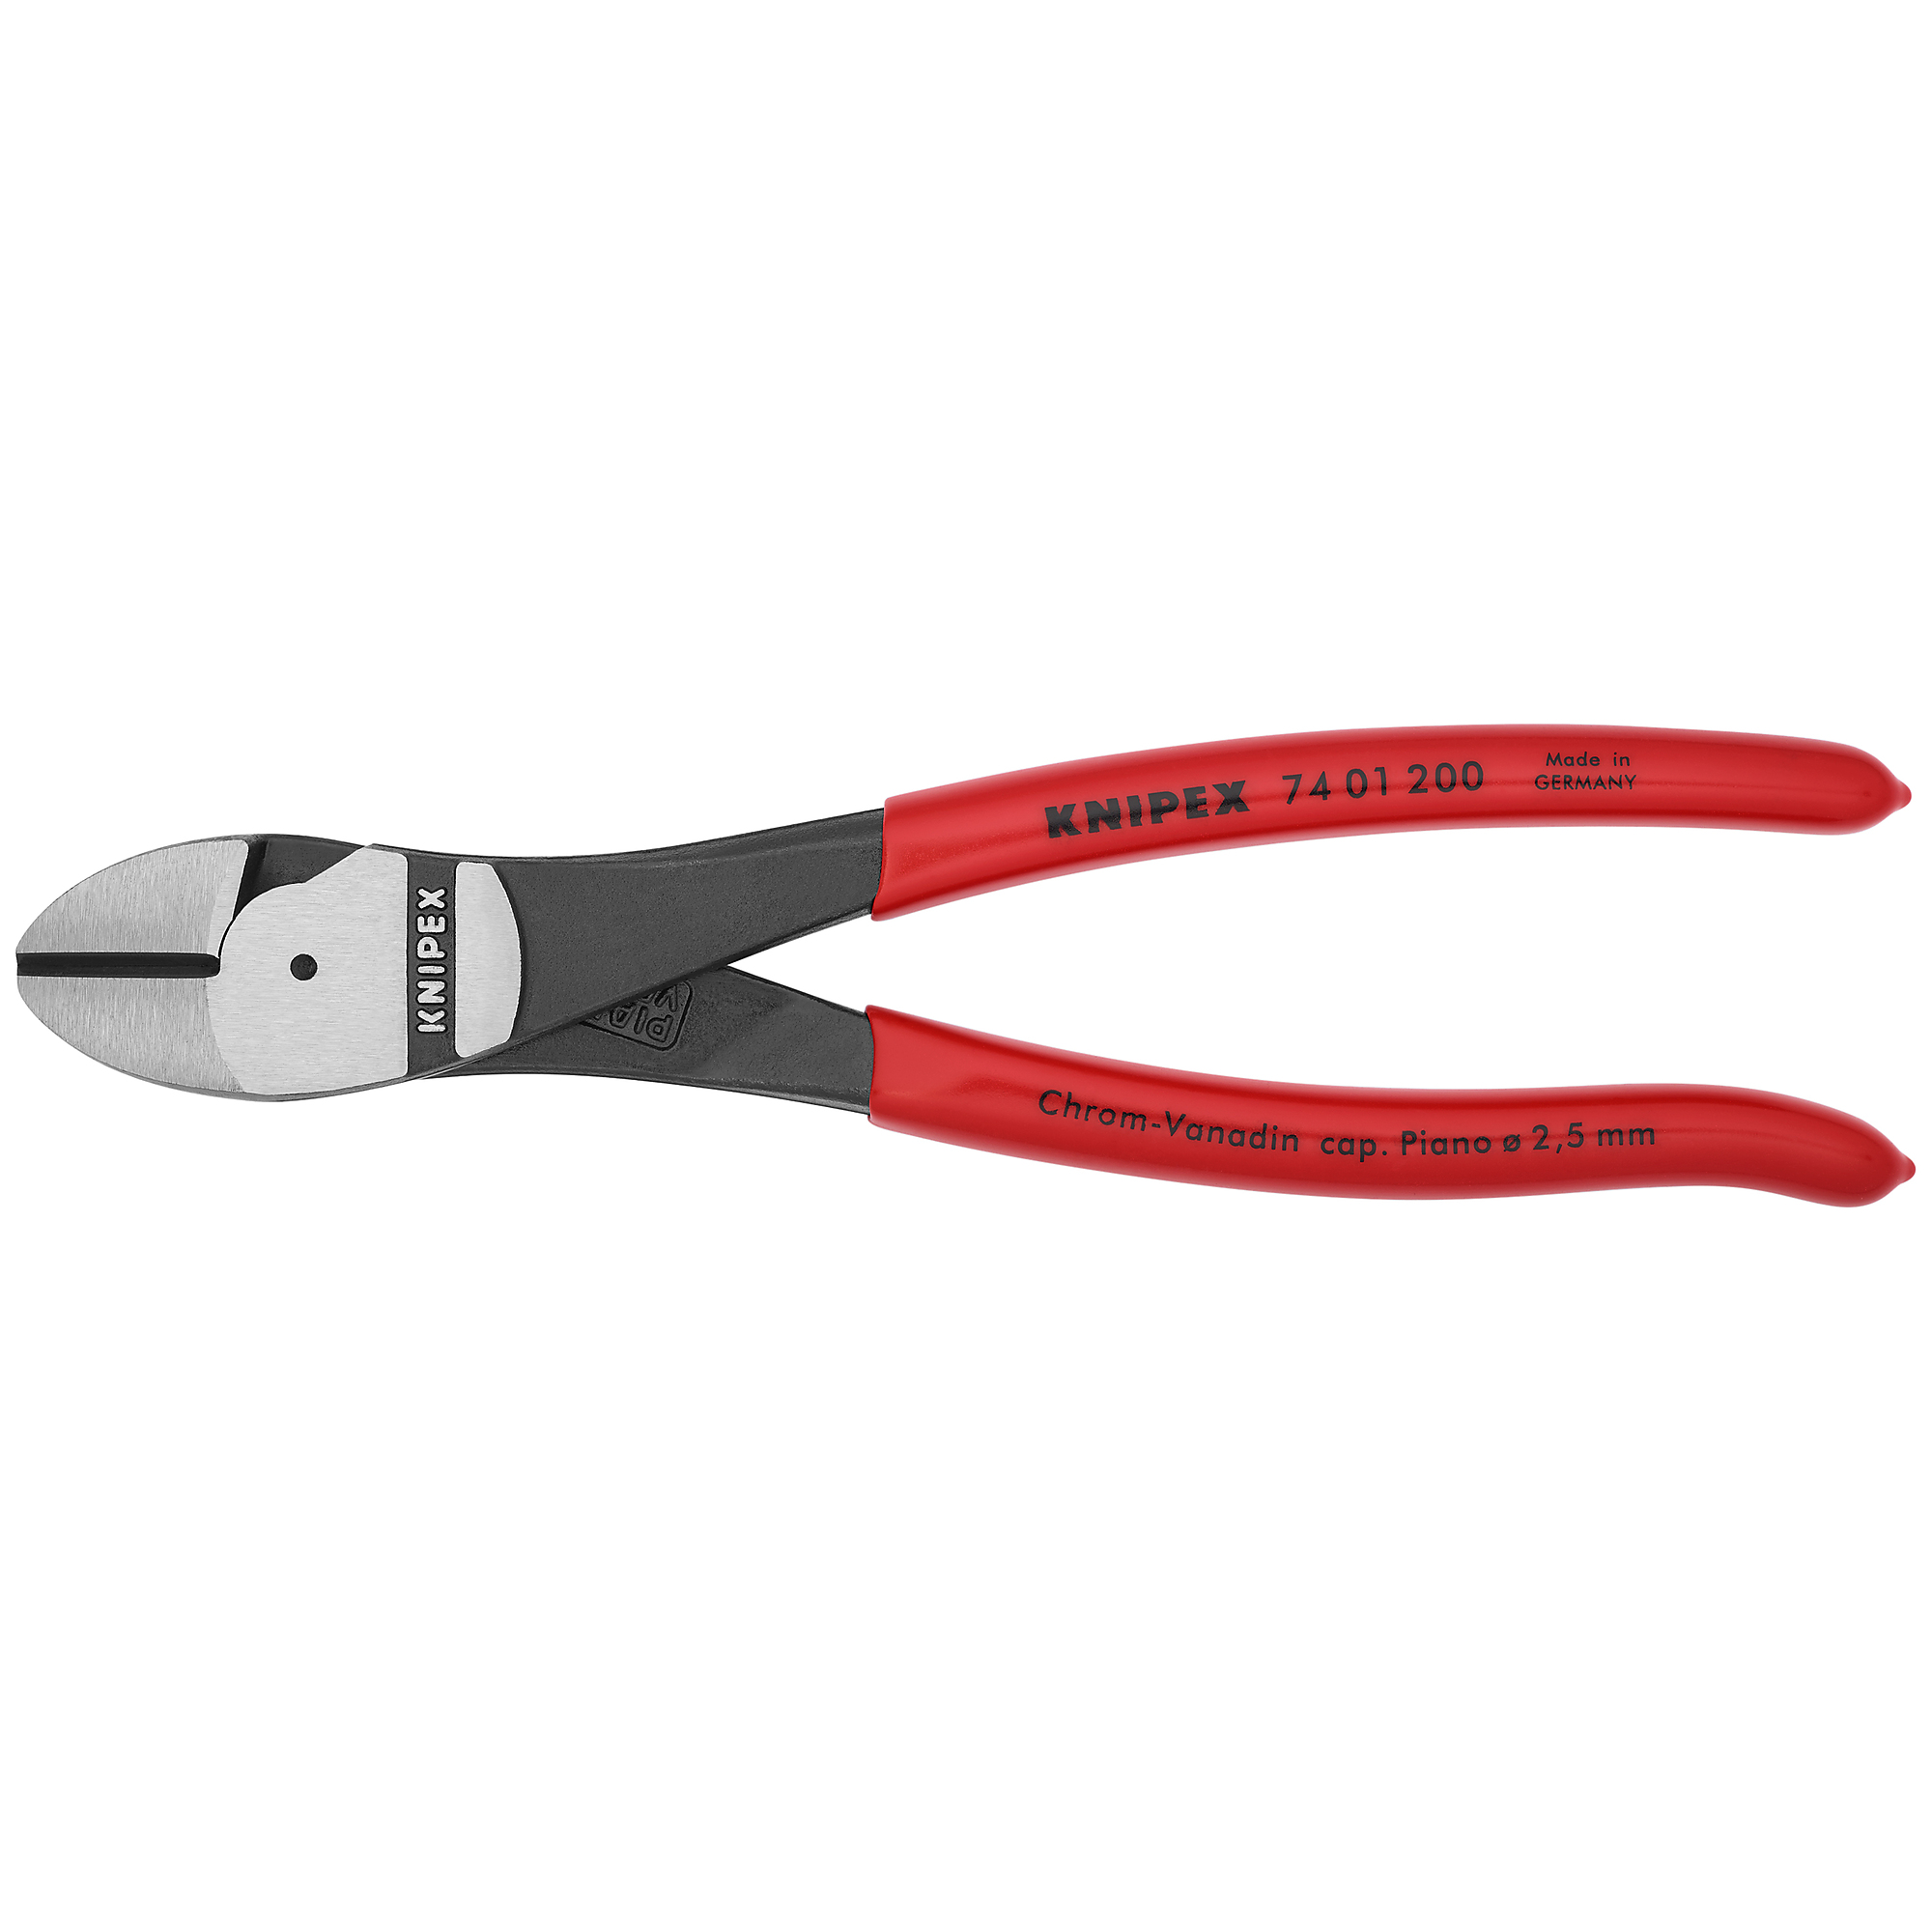 KNIPEX, HL Diagonal Cutters, Plastic coating, 8Inch, Pieces (qty.) 1 Material Steel, Jaw Capacity 0.172 in, Model 74 01 200 SBA